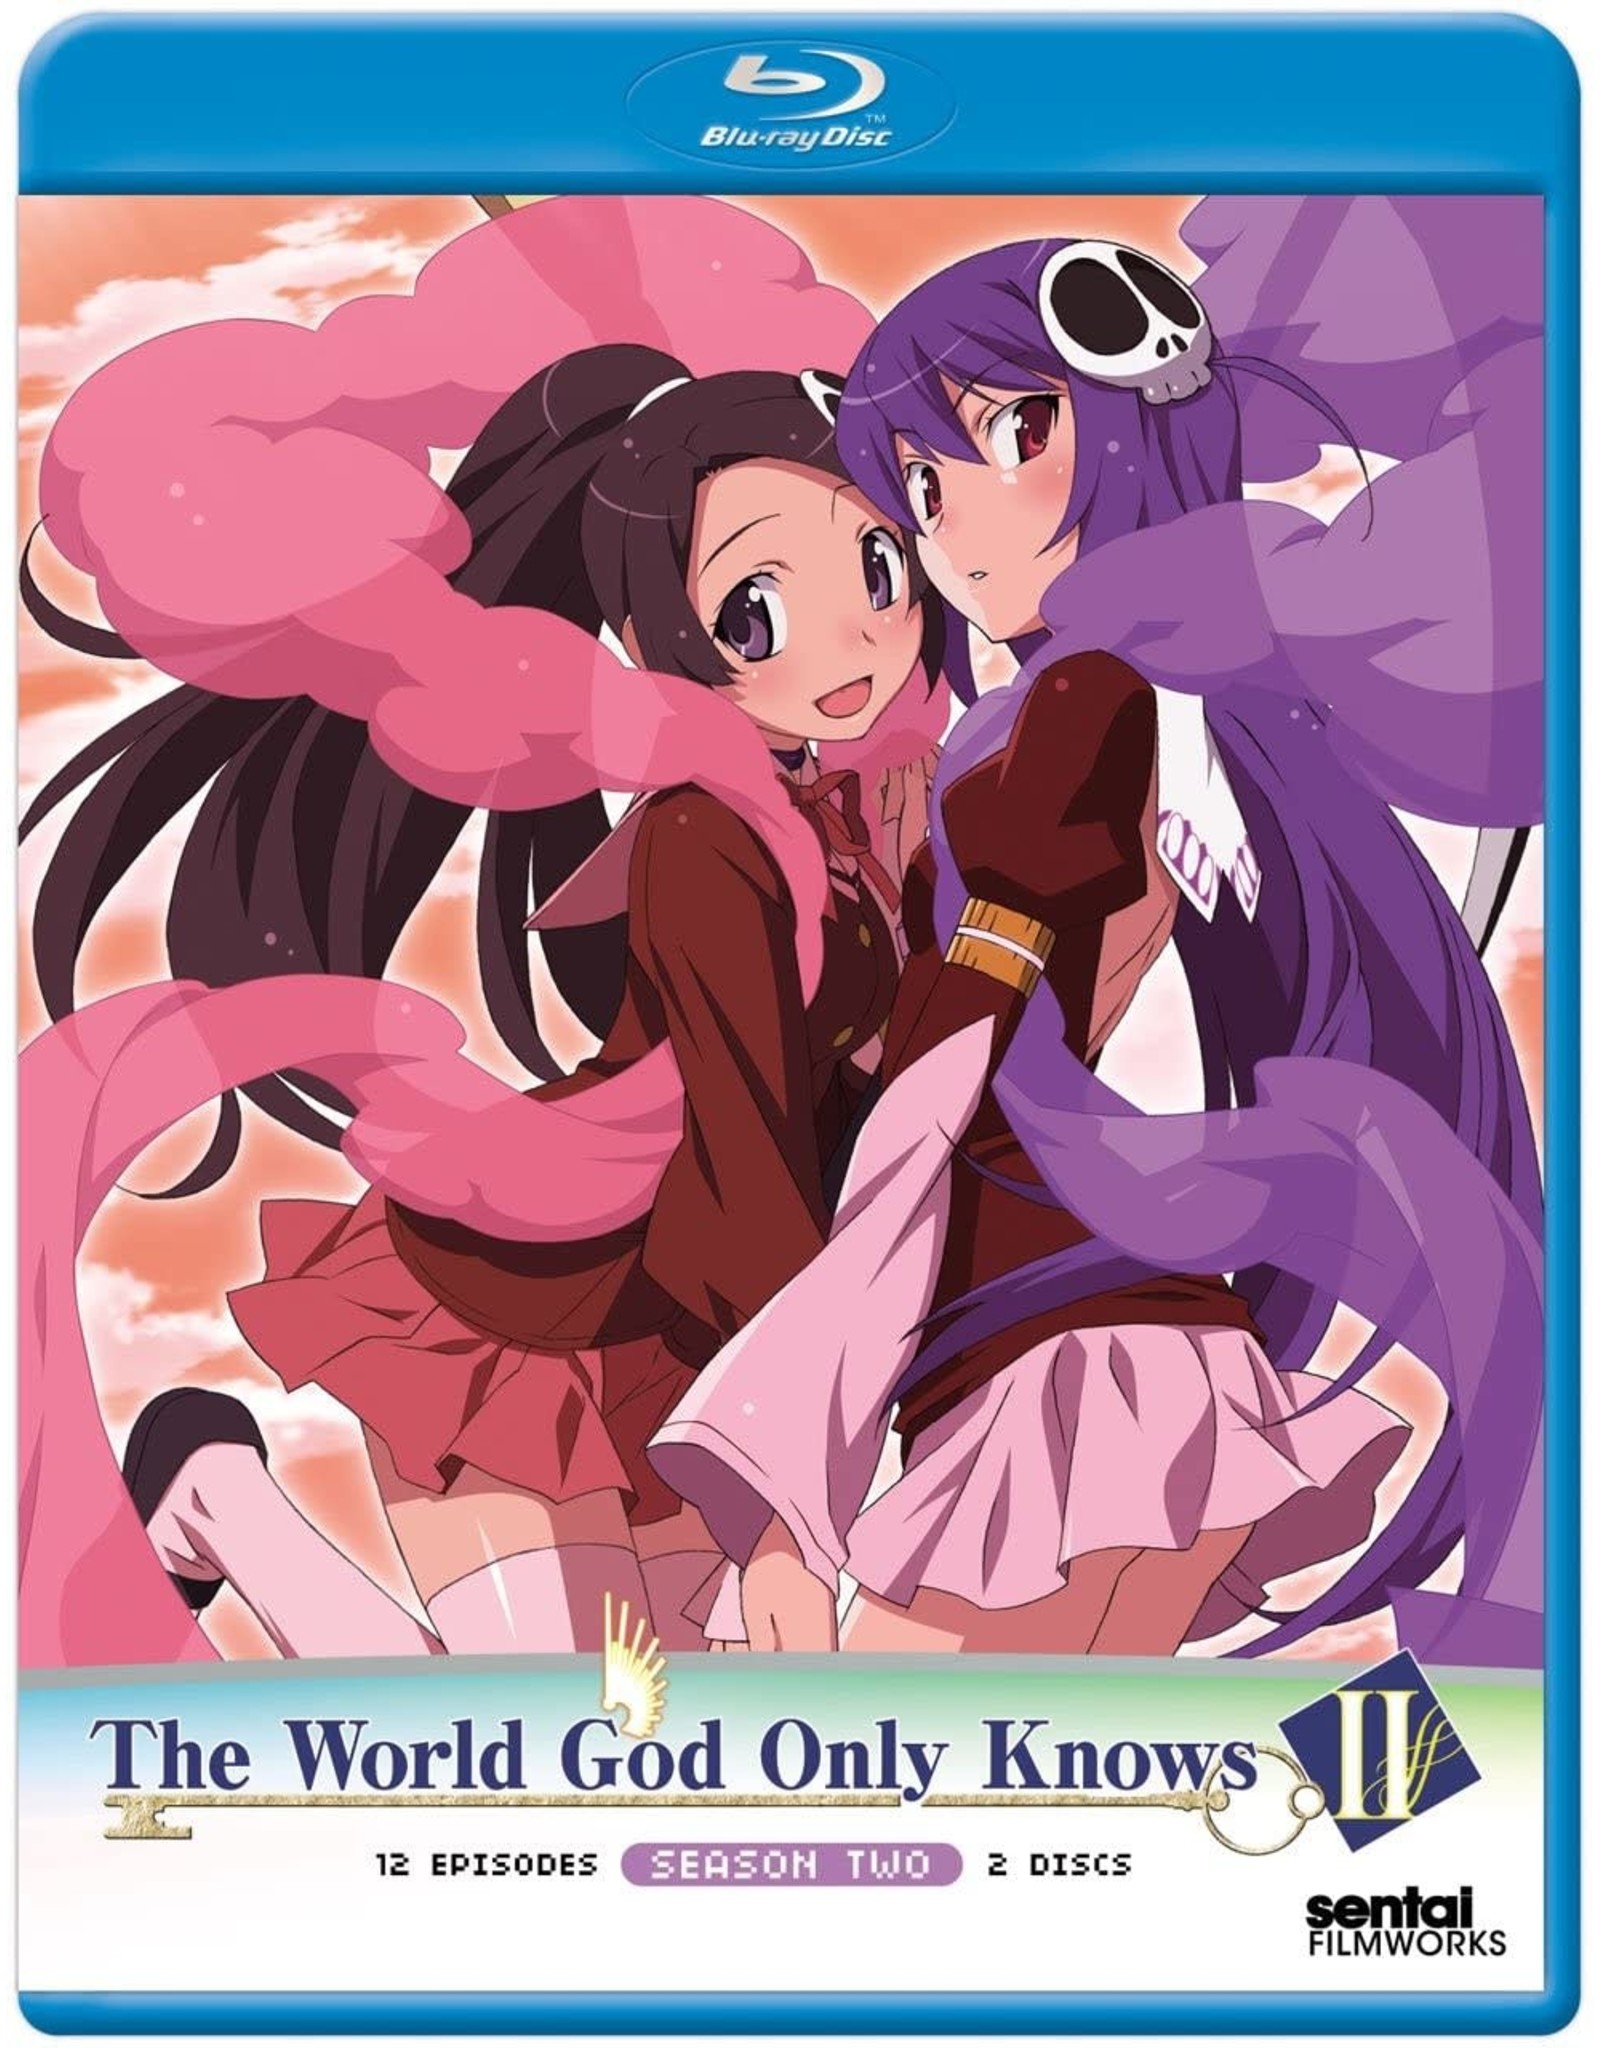 Anime & Animation World God Only Knows, The - Season Two